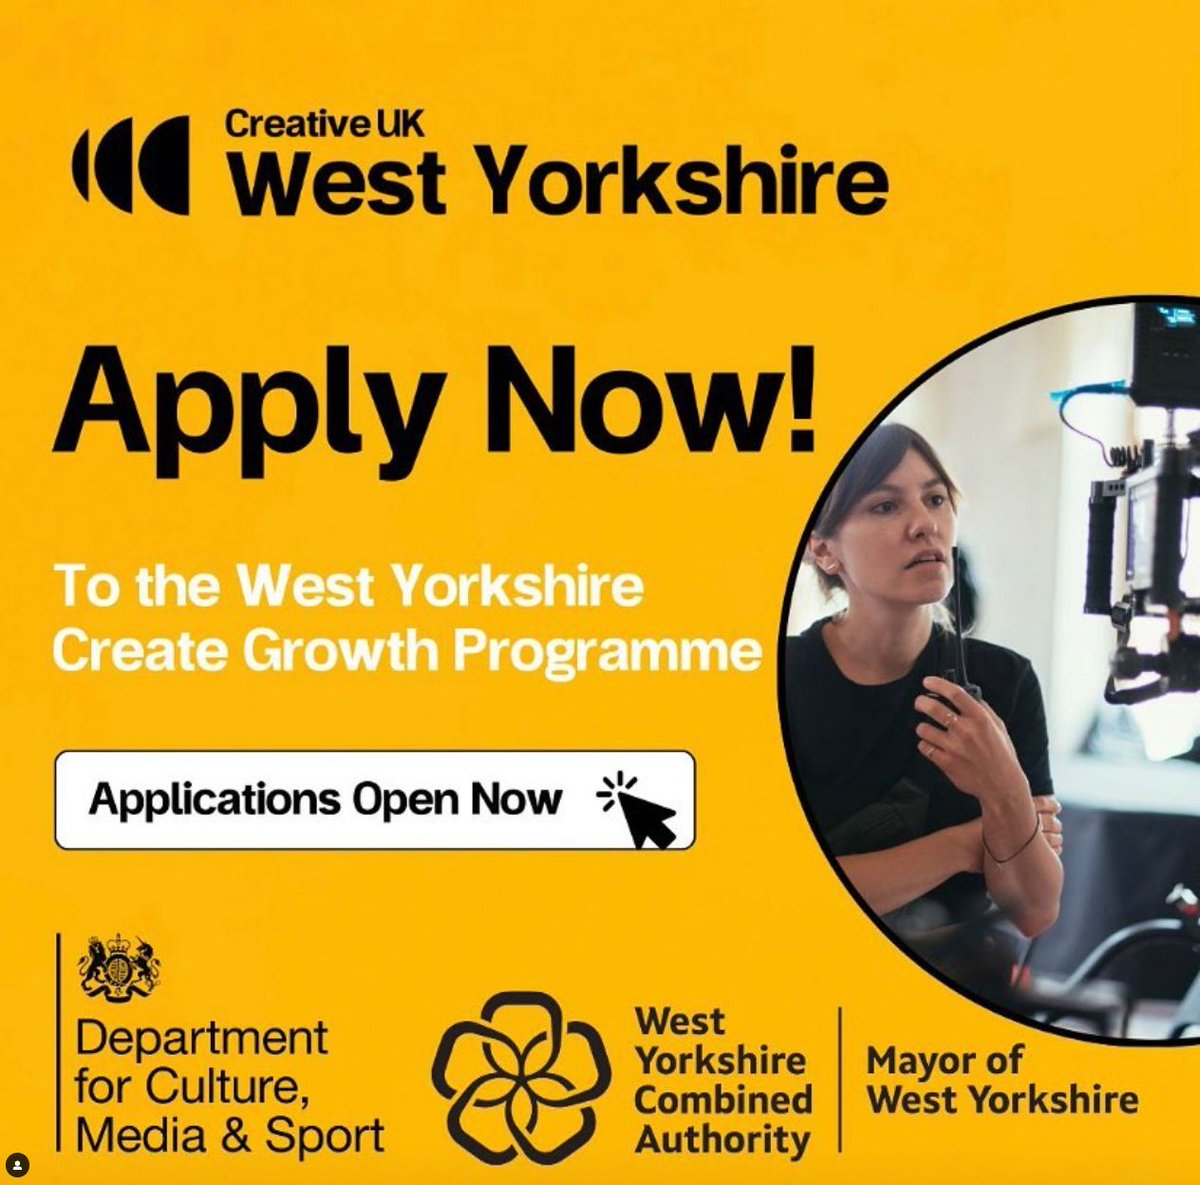 If you want to grow your creative business in West Yorkshire, then apply to the West Yorkshire Create Growth Programme. Submit an expression of interest by 22nd April. Find out more at wearecreative.uk/support/region…